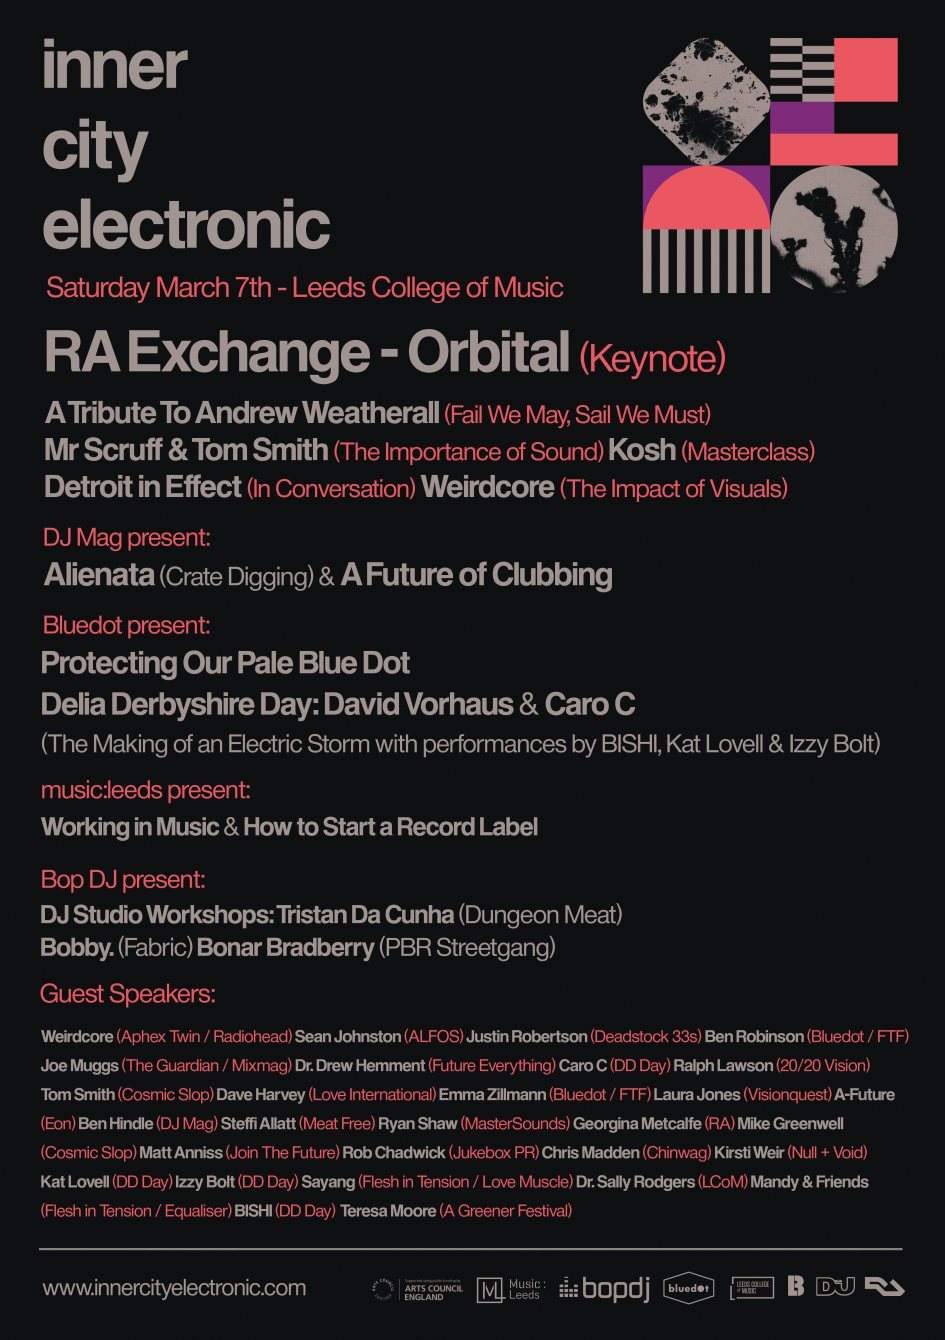 inner city electronic 2020 Conference - フライヤー表